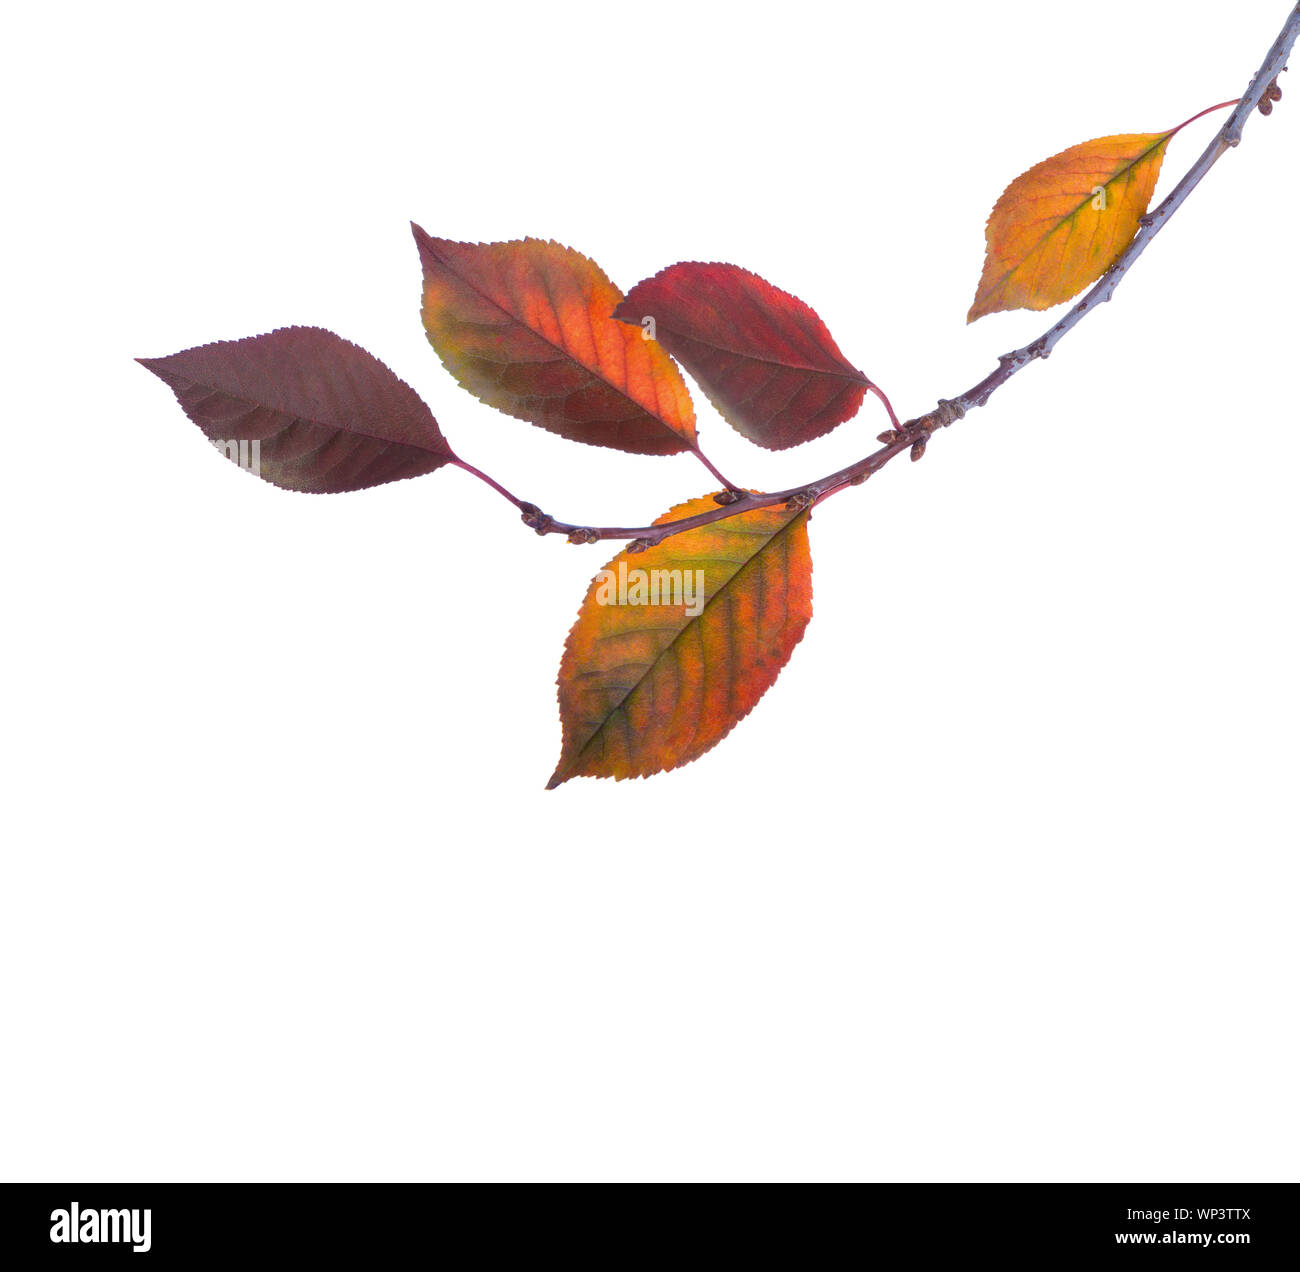 Cherry branch with colorful  autumn leaves isolated on white background. Prunus cerasus. Stock Photo